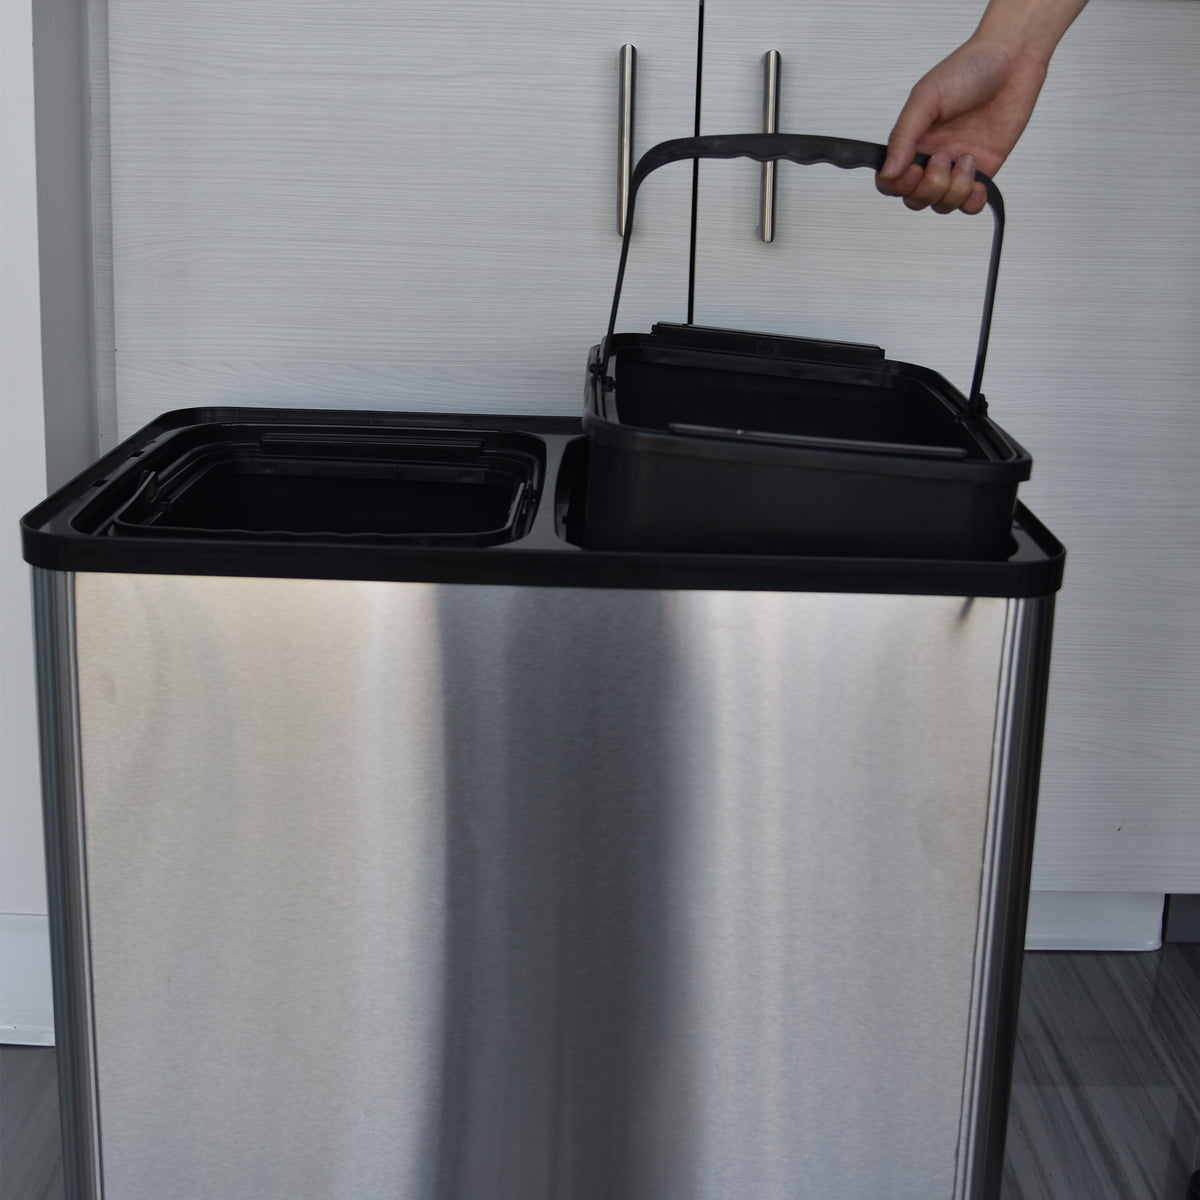 iTouchless 16 Gallon / 61 Liter Stainless Steel Sensor Recycle Bin & Trash Can removable inner buckets